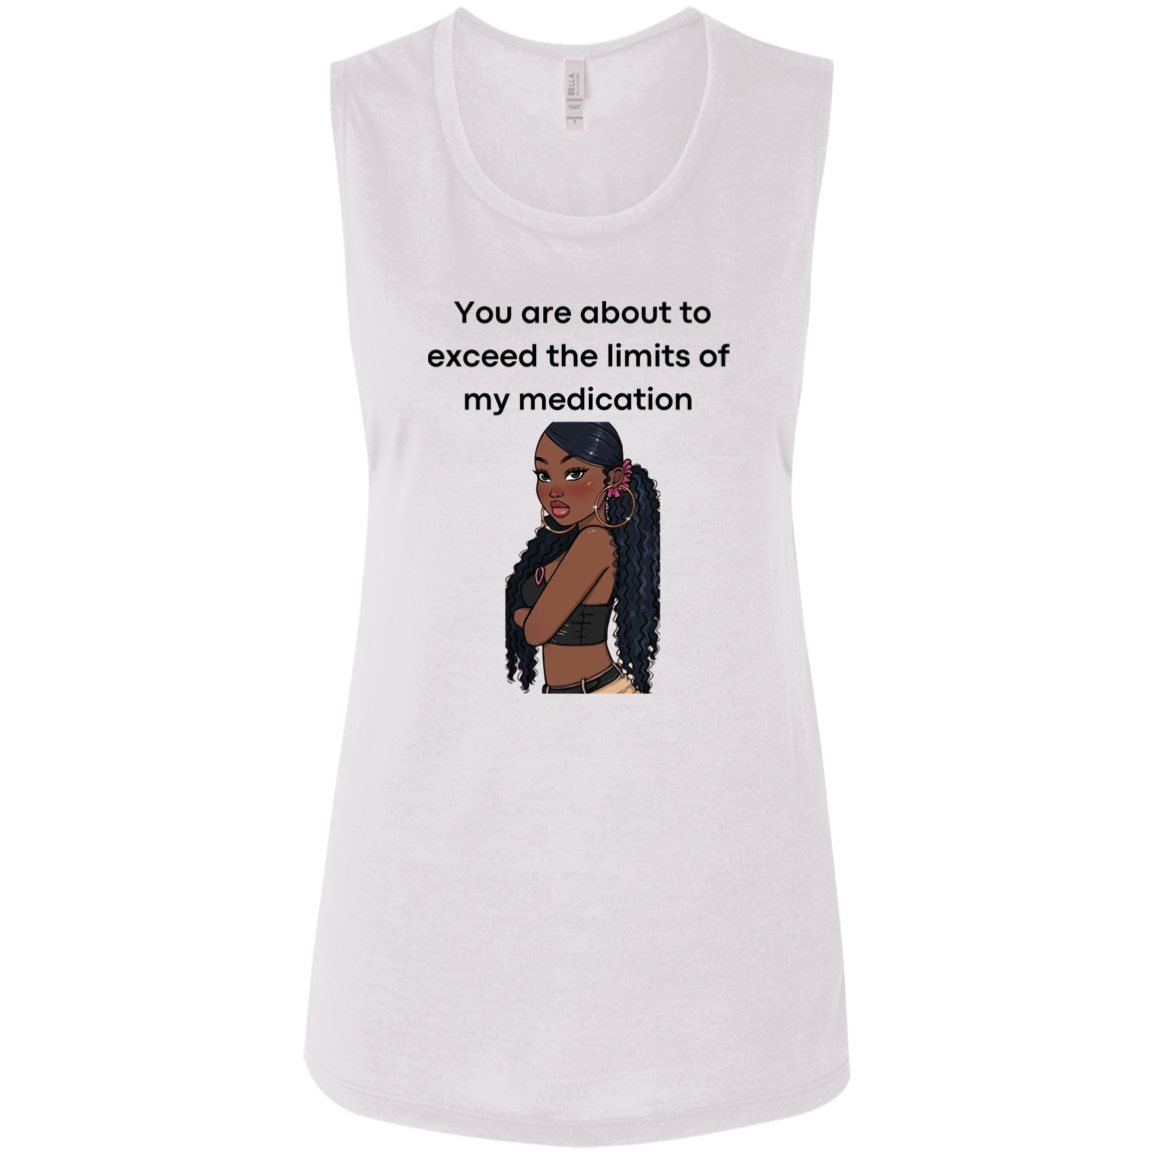 You Are About to Exceed the Limits of My Medication Ladies Flowy Muscle Tank